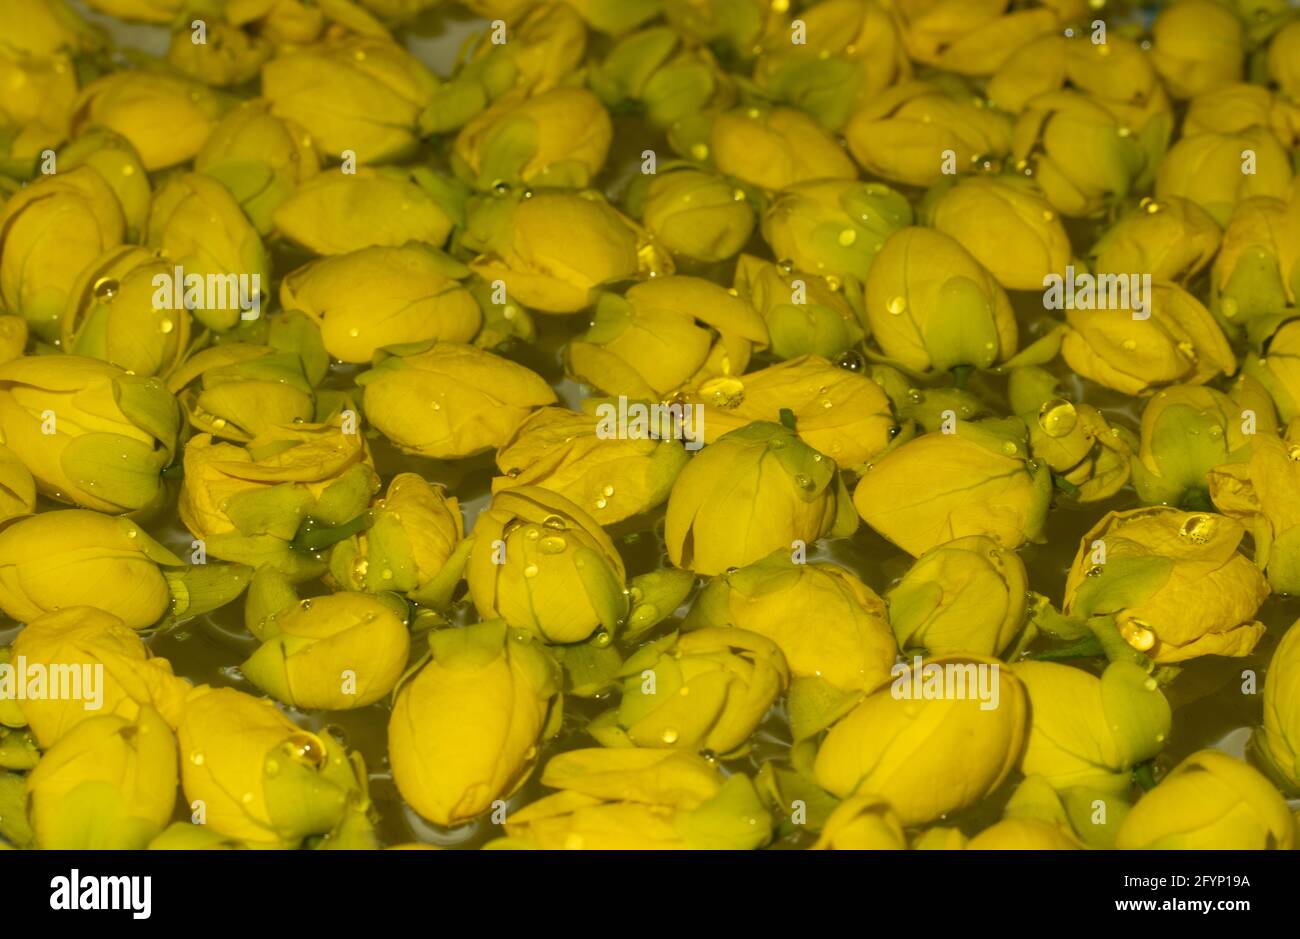 Golden shower yellow flower on clear water closeup or a bunch of Indian-laburnum Stock Photo